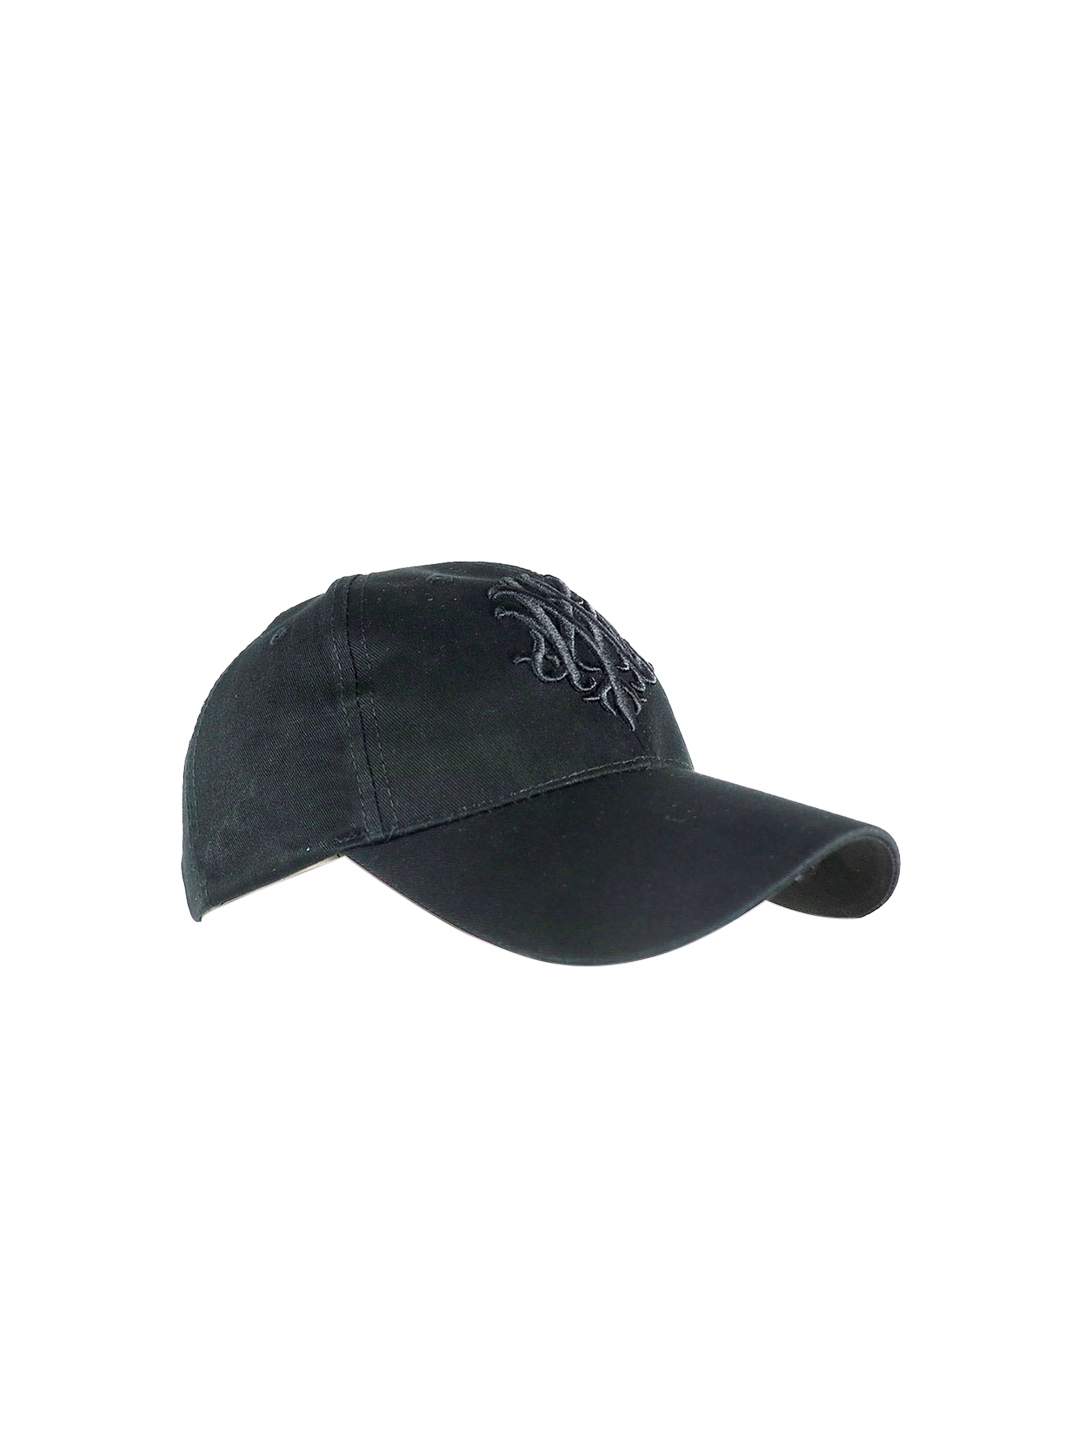 iSWEVEN Unisex Black   Grey Embroidered Snapback Cap